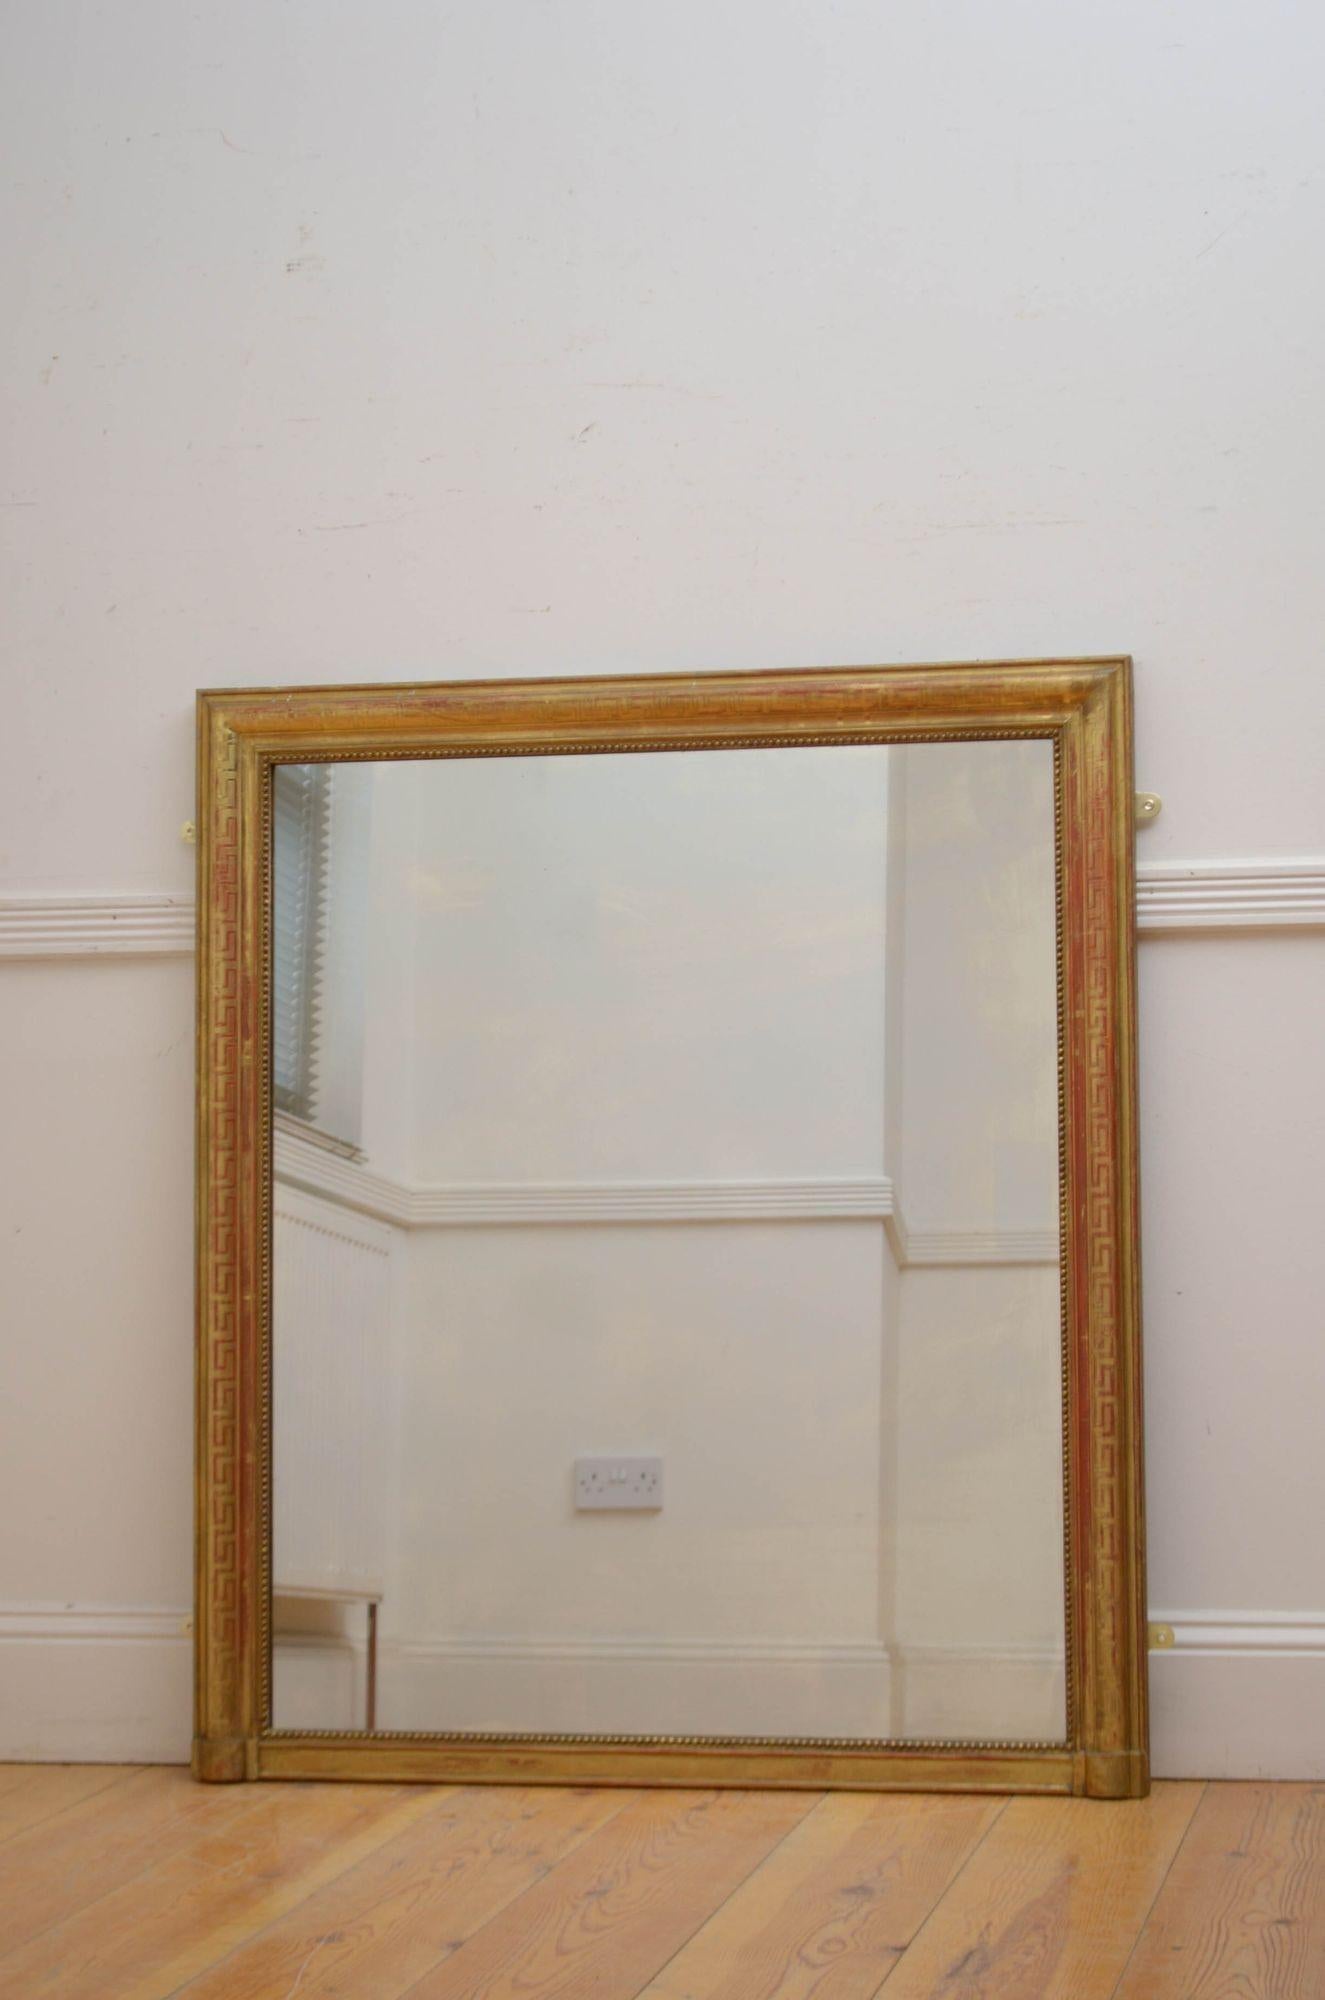 Sn5538 Elegant 19th century French, giltwood wall mirror, having original glass with some imperfections in beaded, moulded and gilded frame with Greek key decoration throughout. This antique mirror retains its original glass, original gilt, and